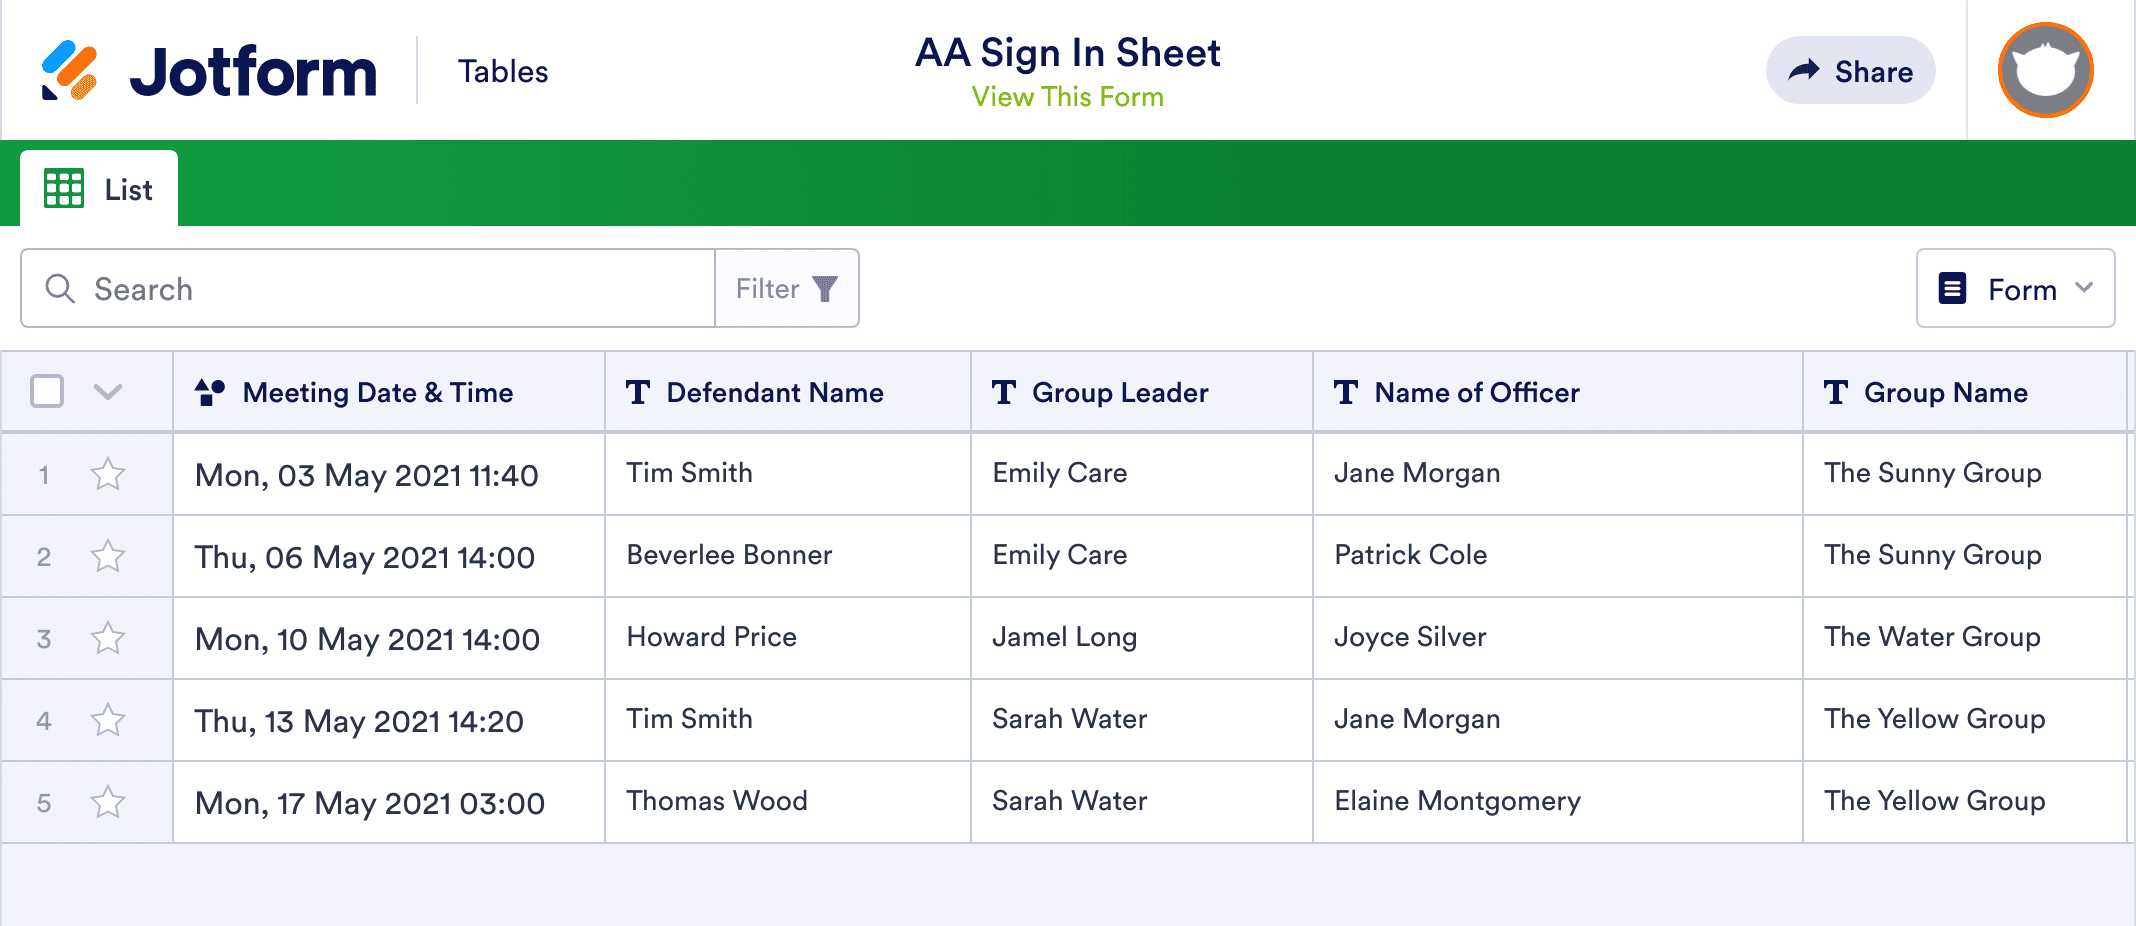 AA Sign In Sheet